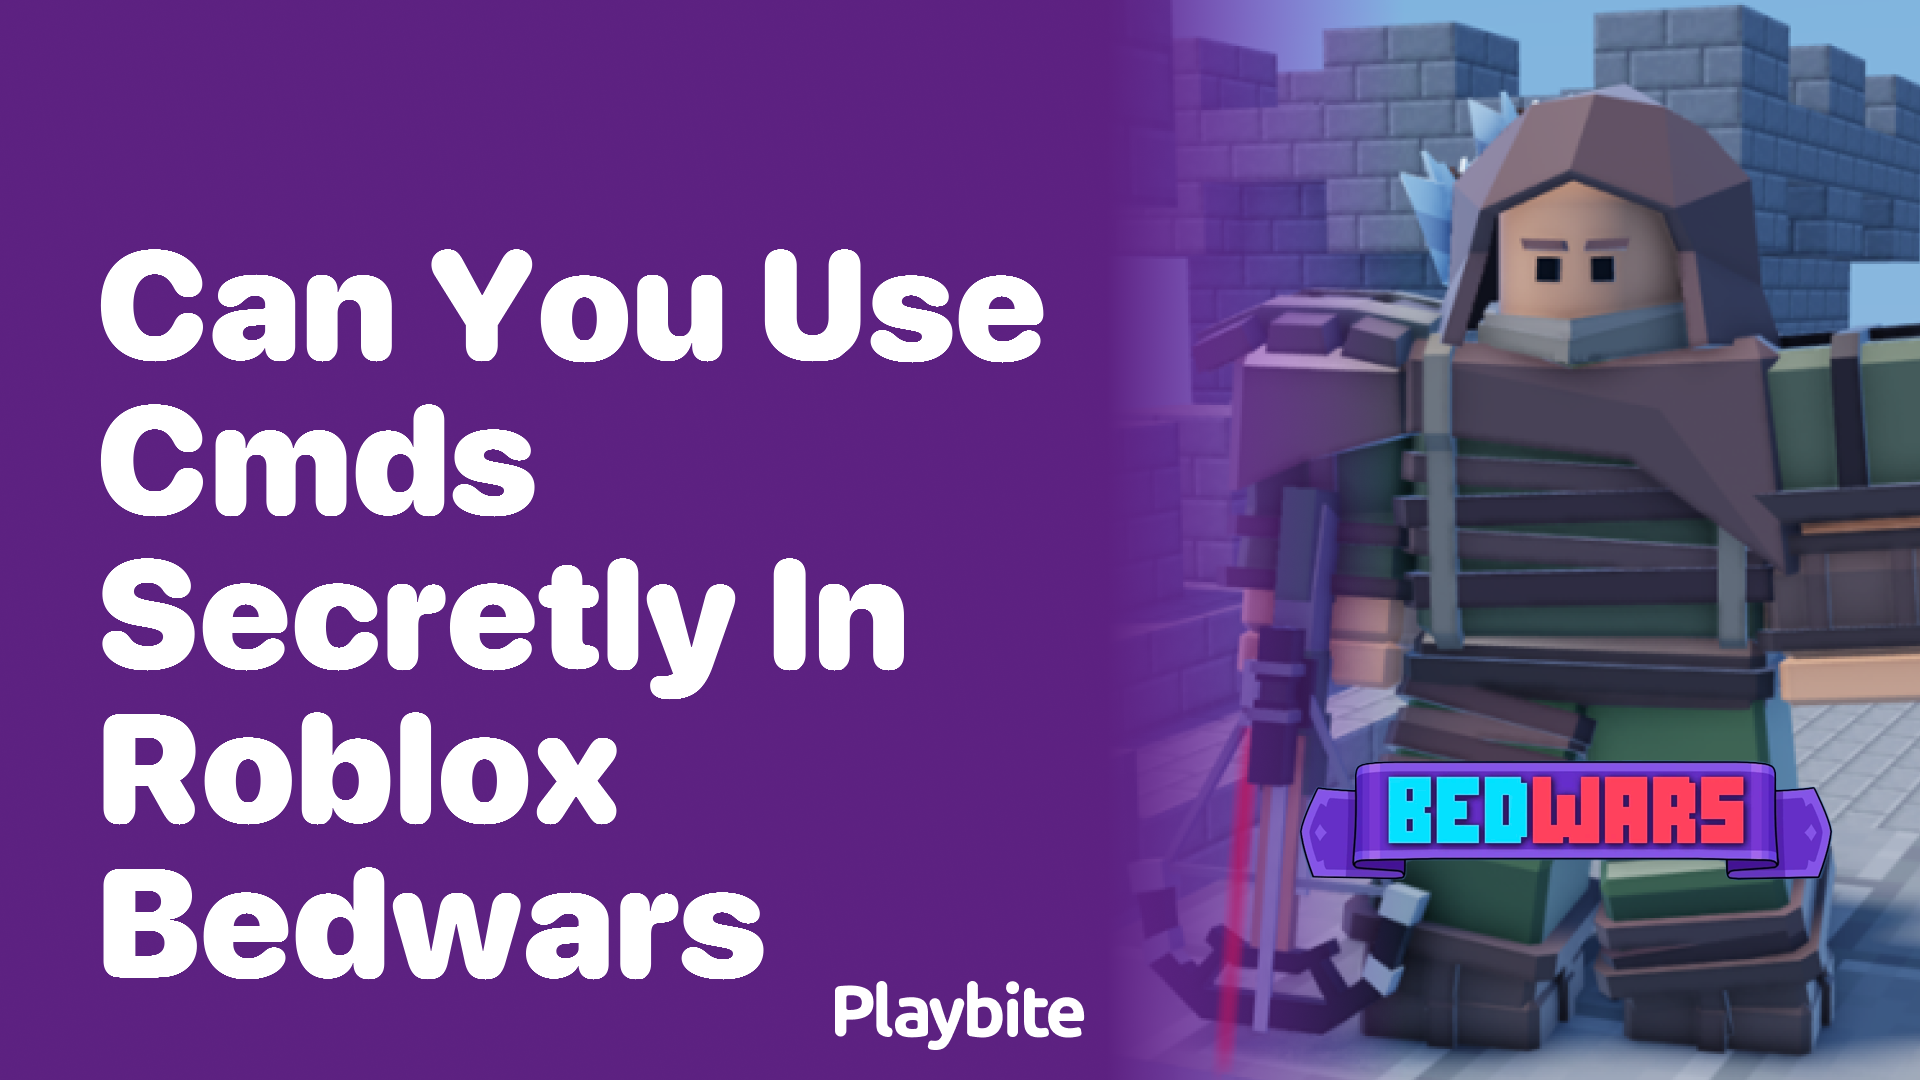 Can You Use Commands Secretly in Roblox Bedwars?